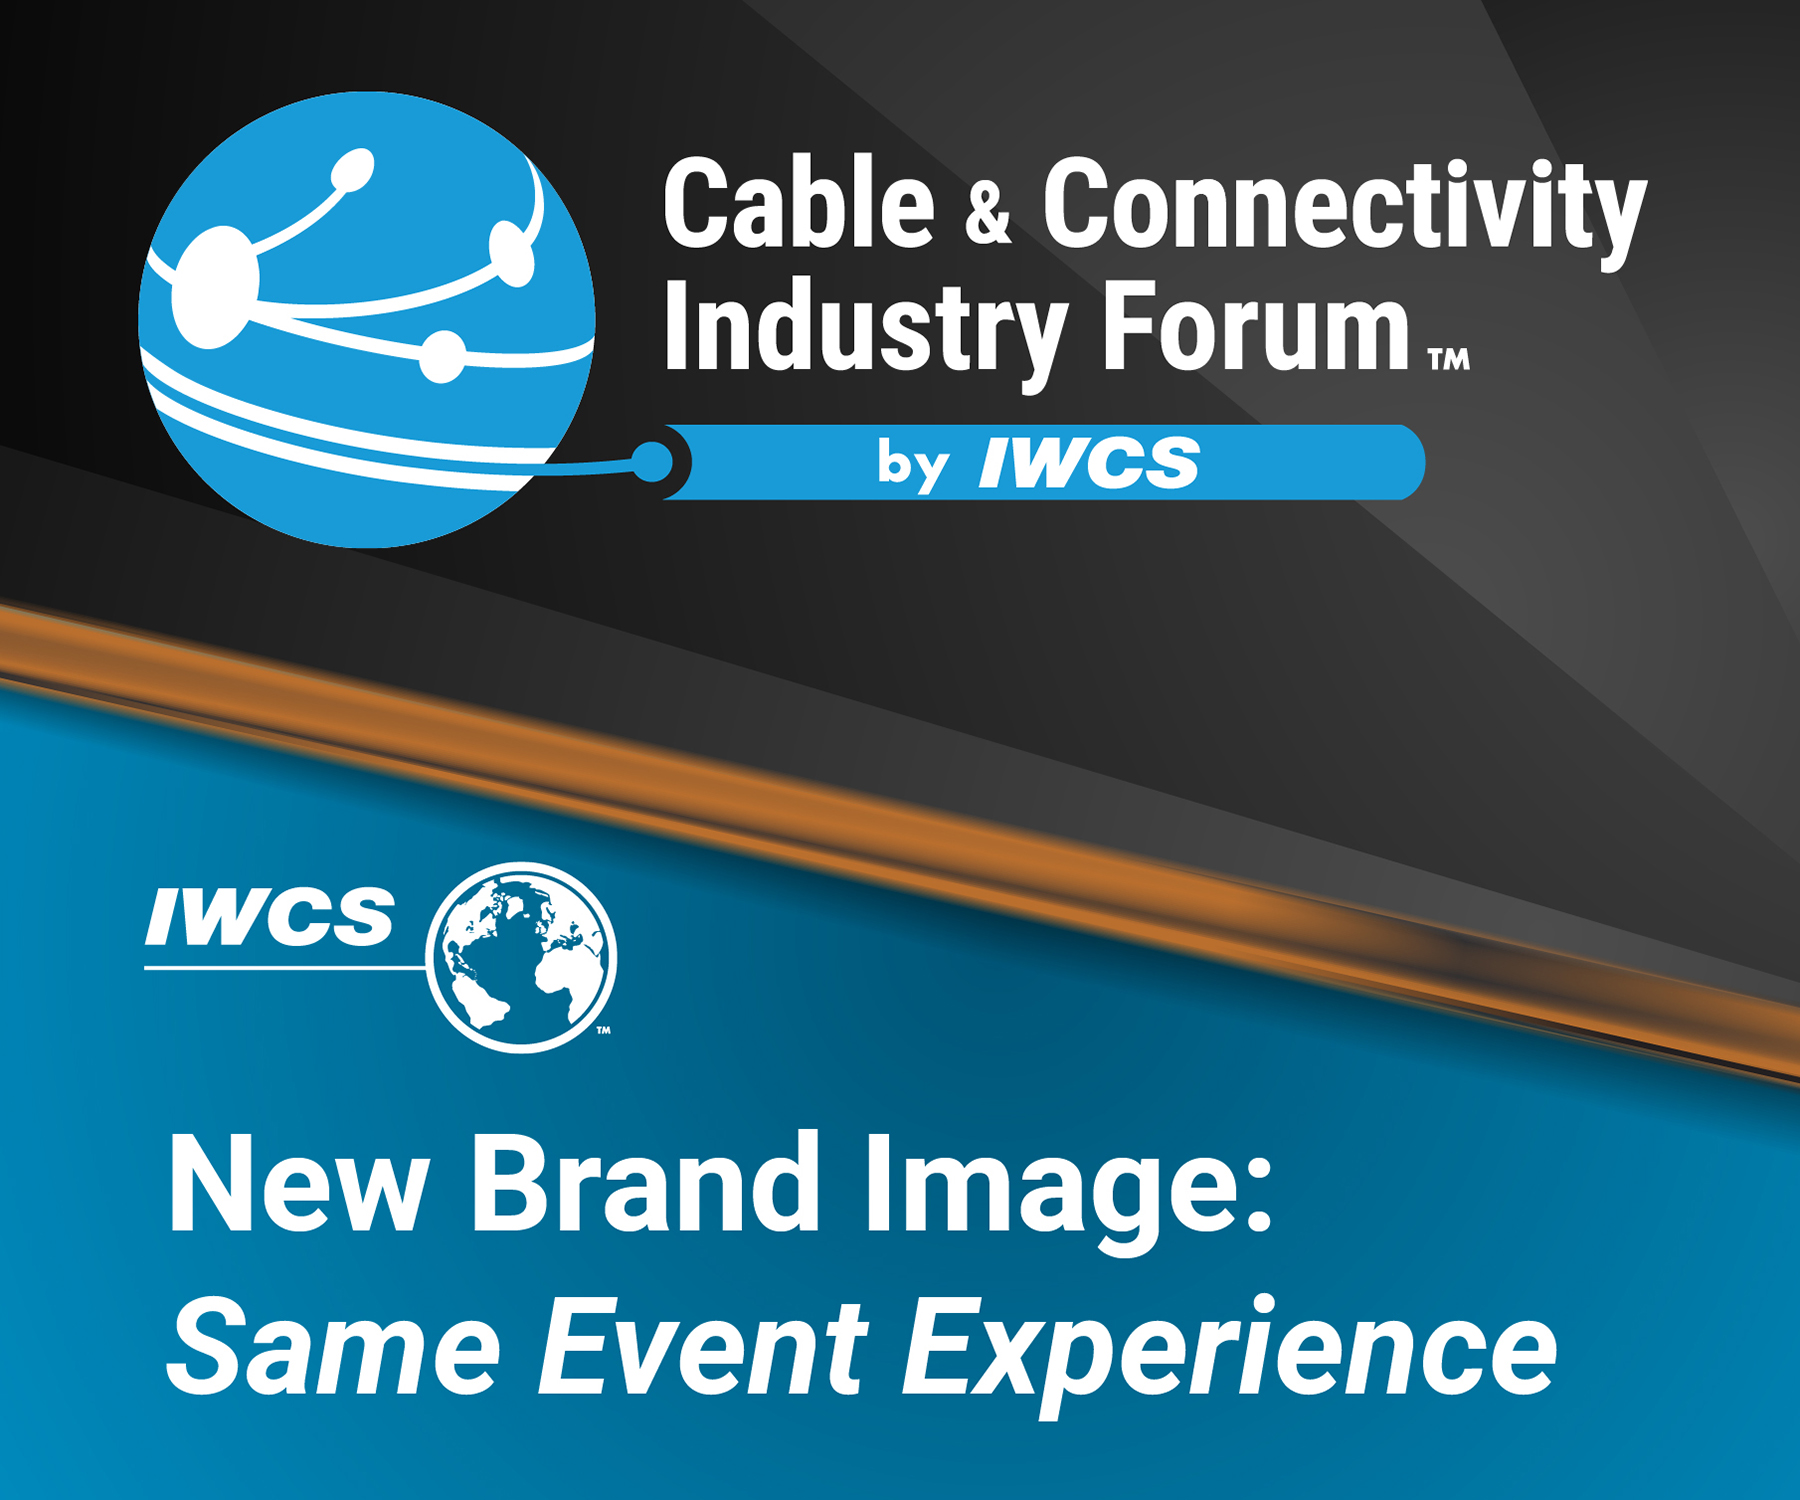 IWCS new brand image for Cable & Connectivity Industry Forum